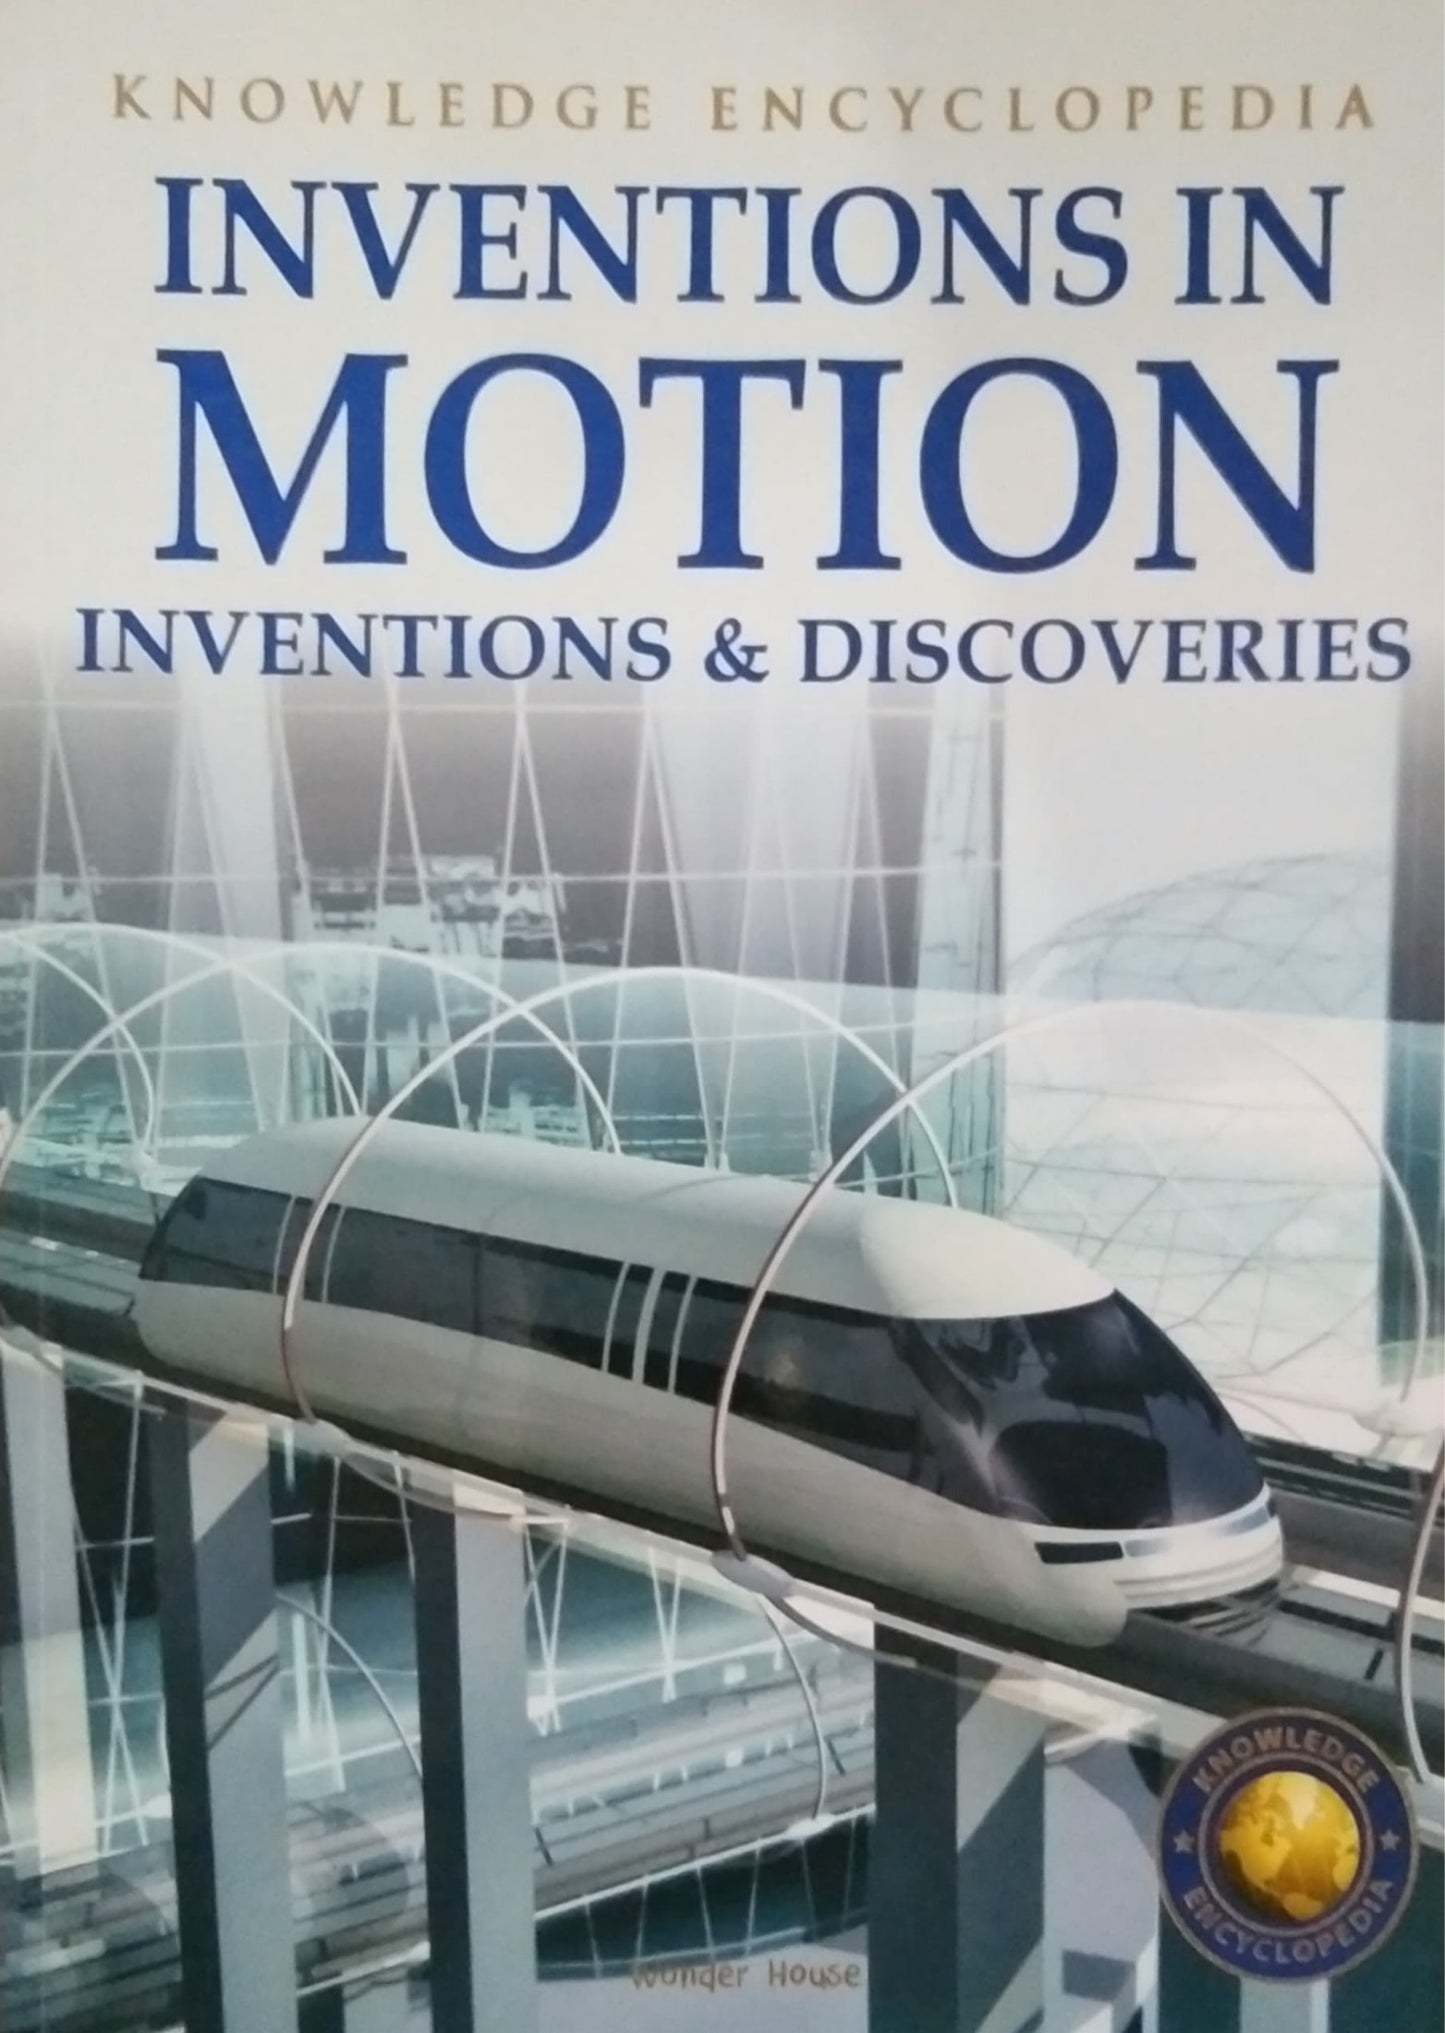 INVENTIONS IN MOTION